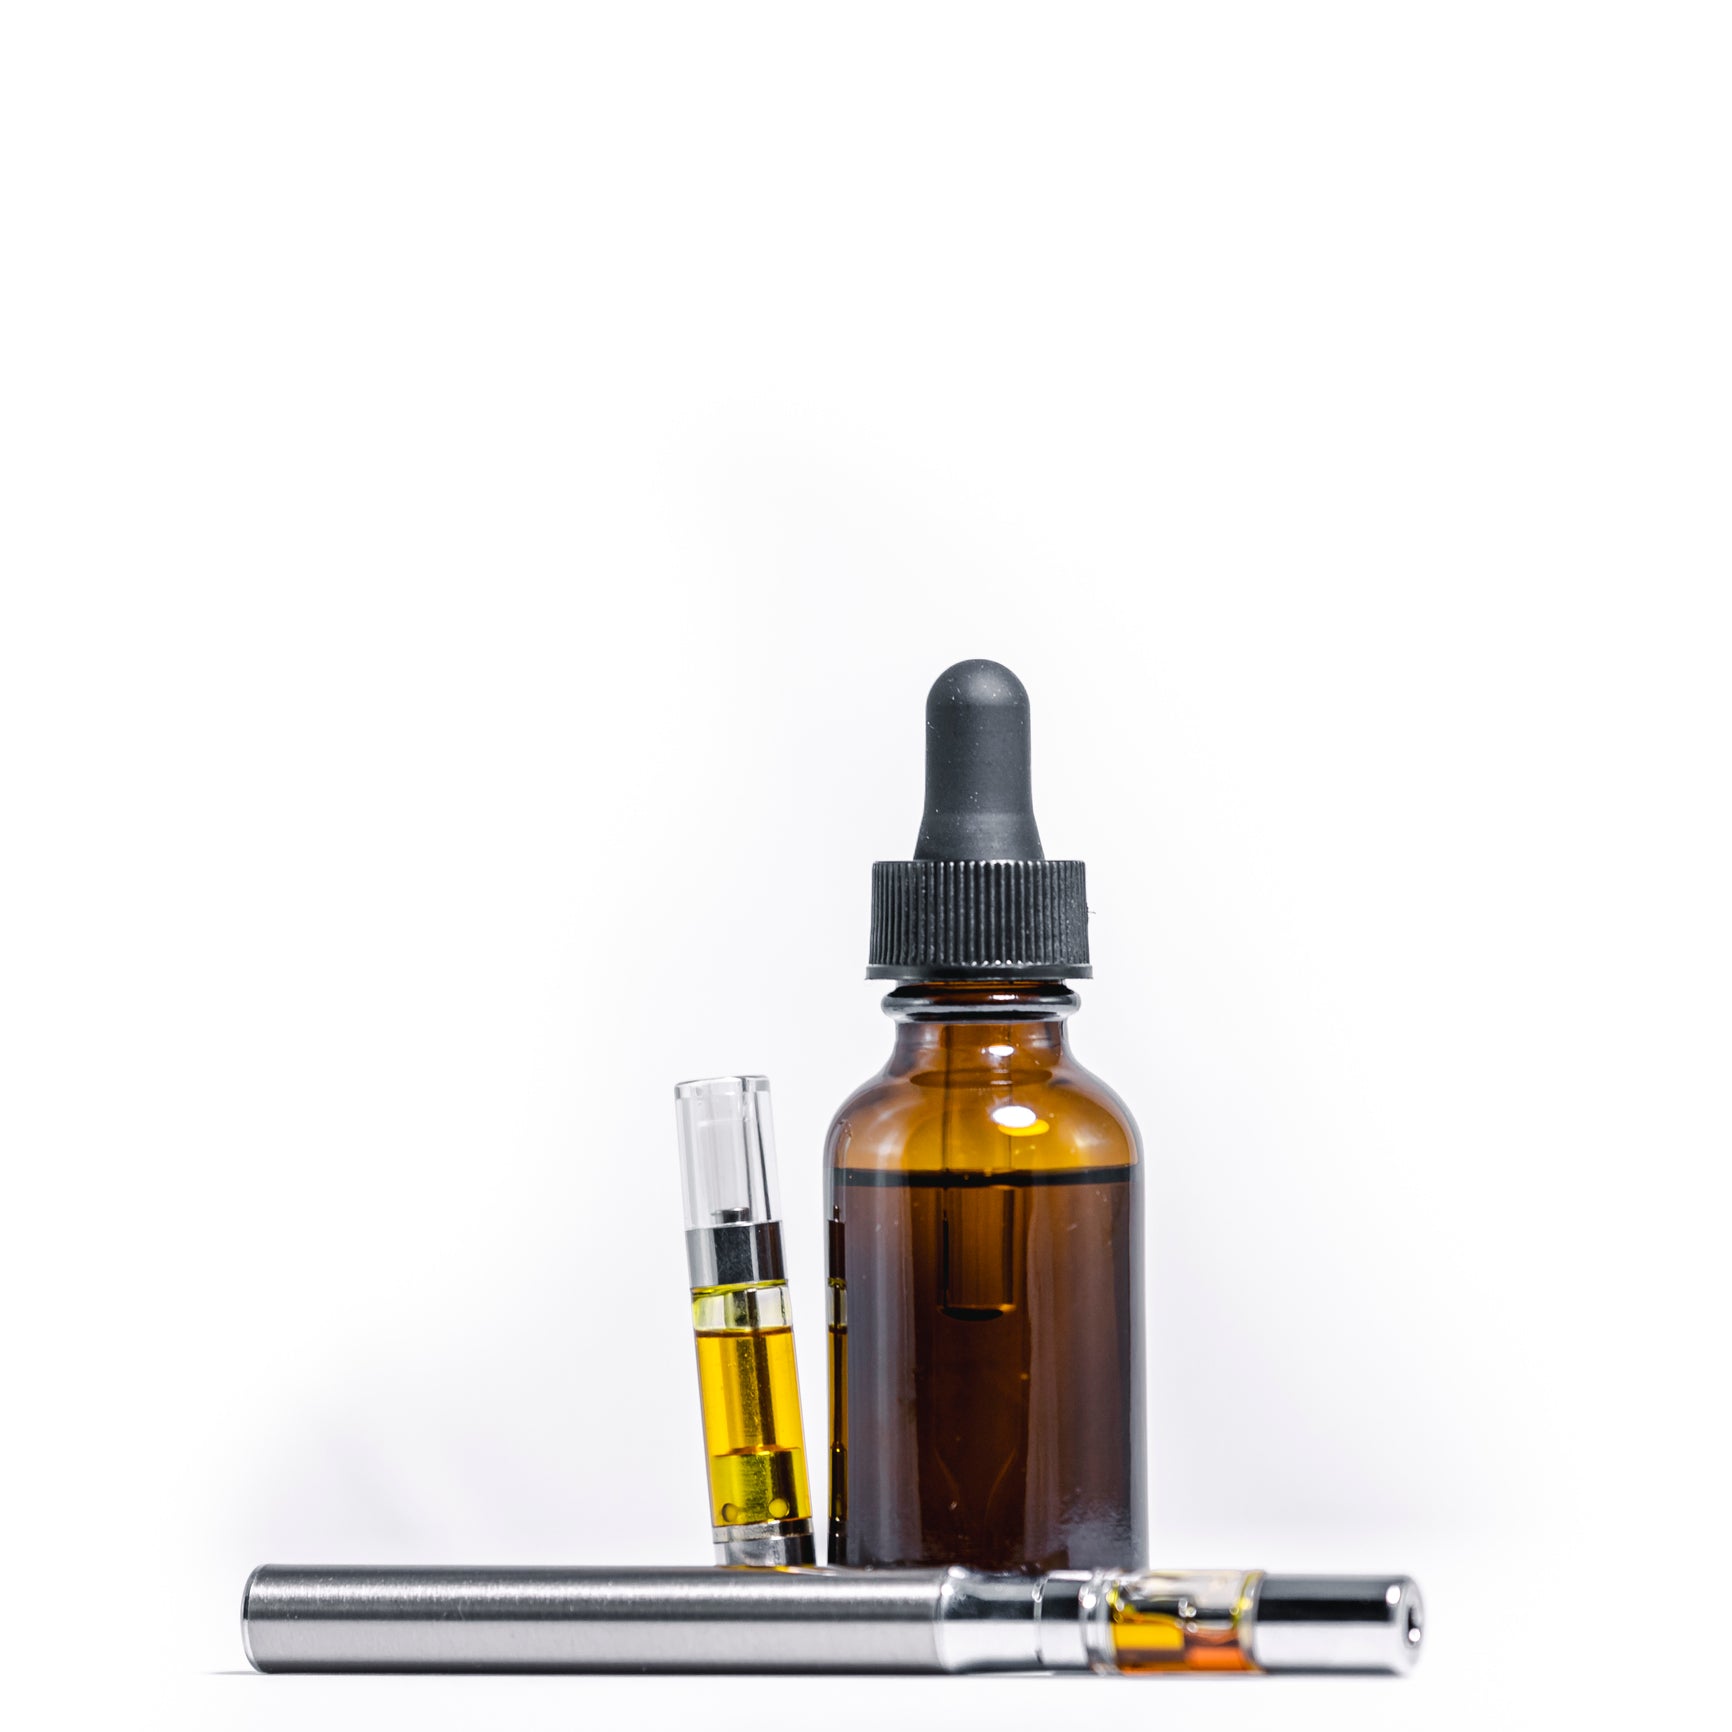 A weed vape pen and cartridge with THC oil lie next to a vial with cannabis distillate.